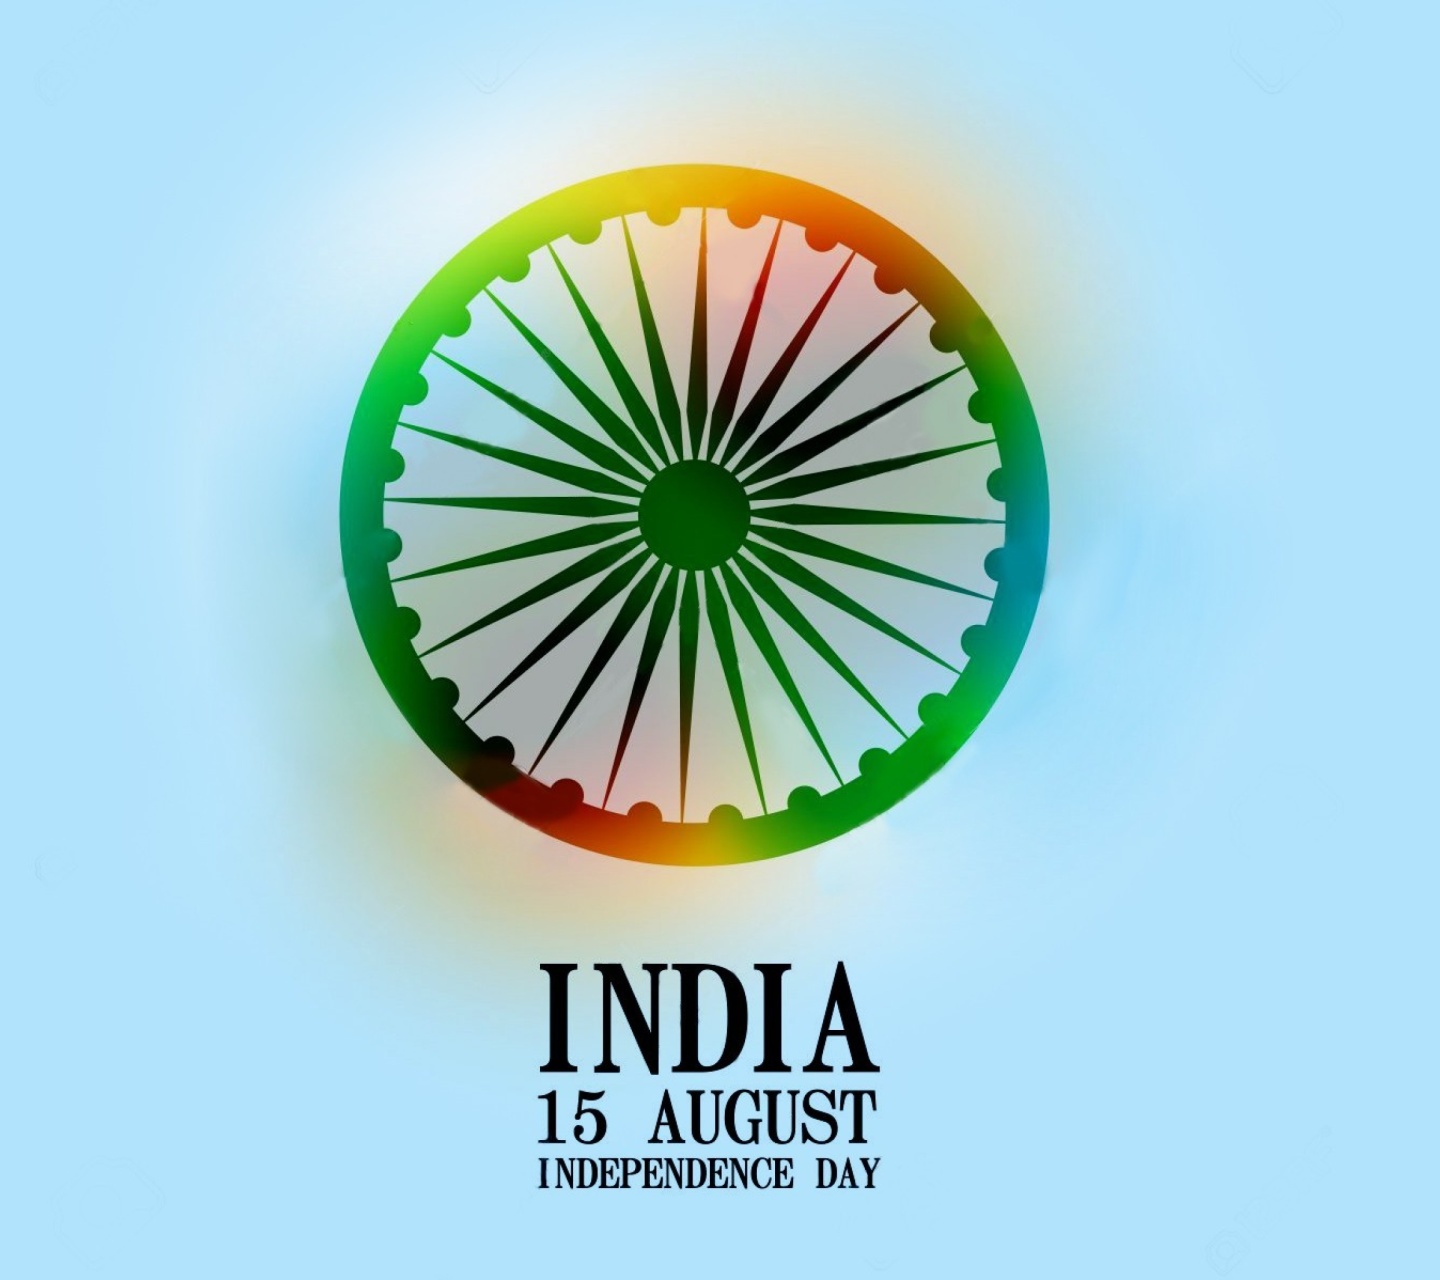 Обои India Independence Day 15 August 1440x1280